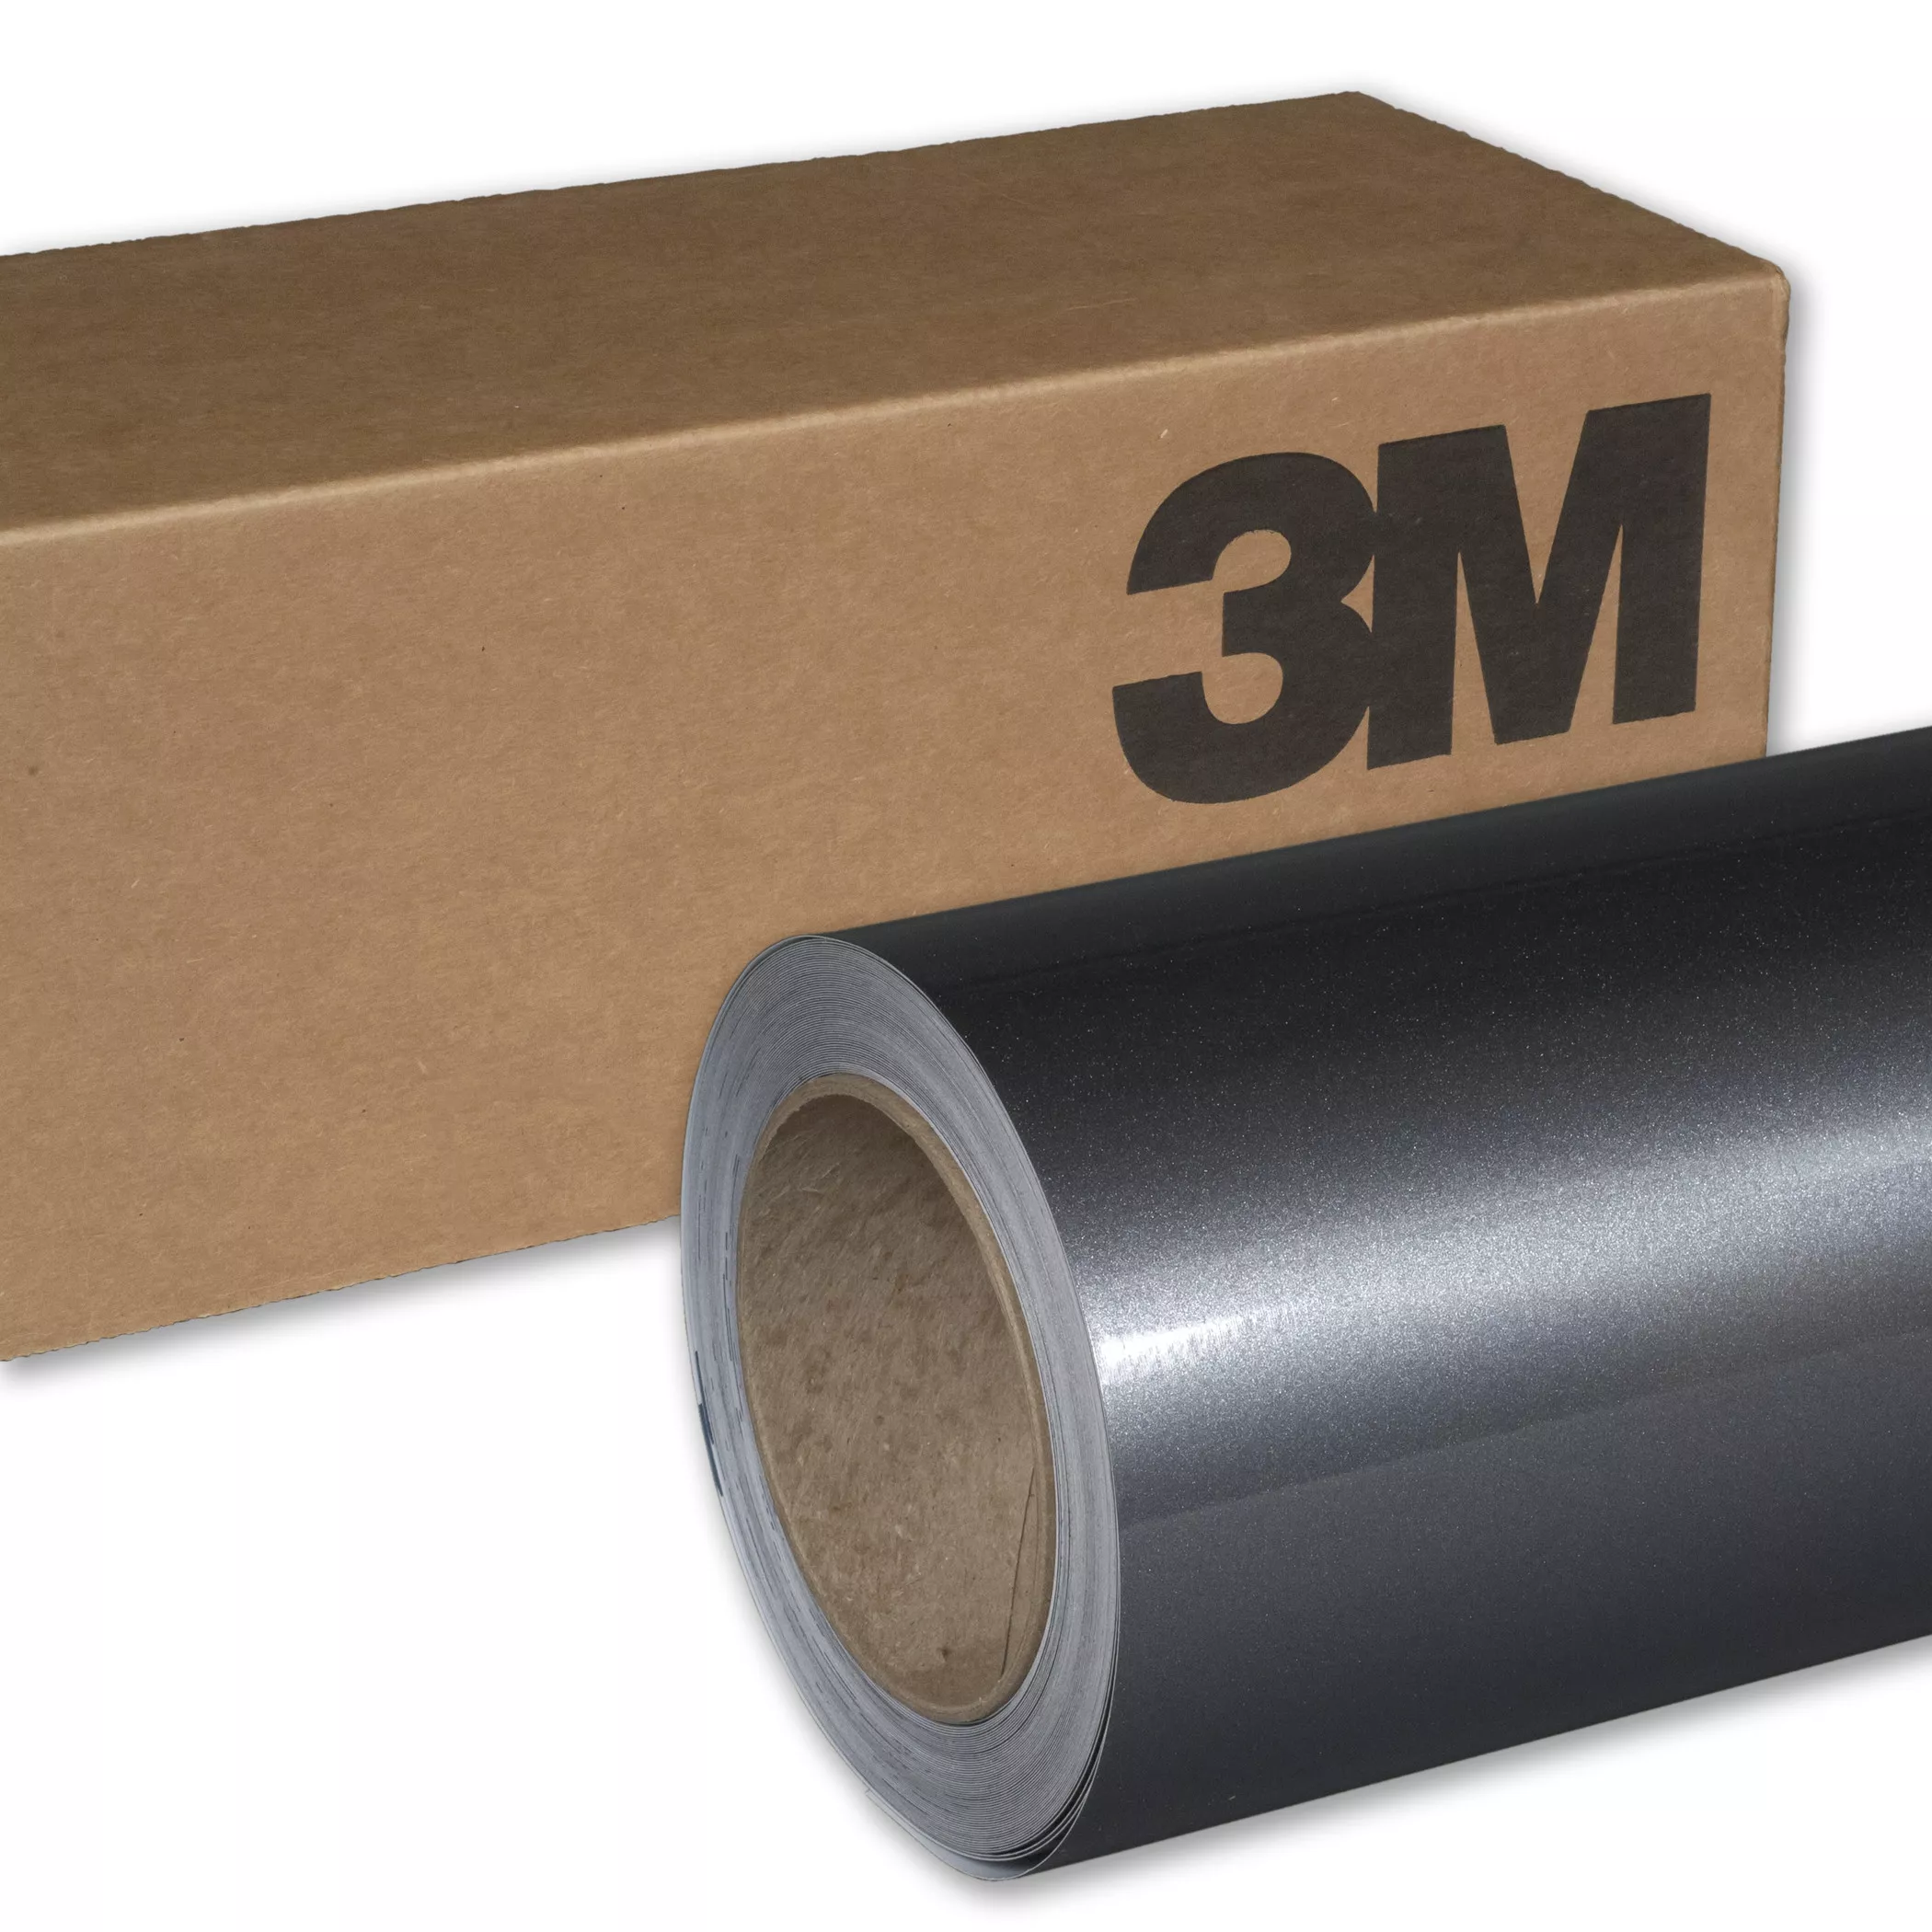 3M™ Wrap Film Series 1080-G201, Gloss Anthracite, 60 in x 10 yd